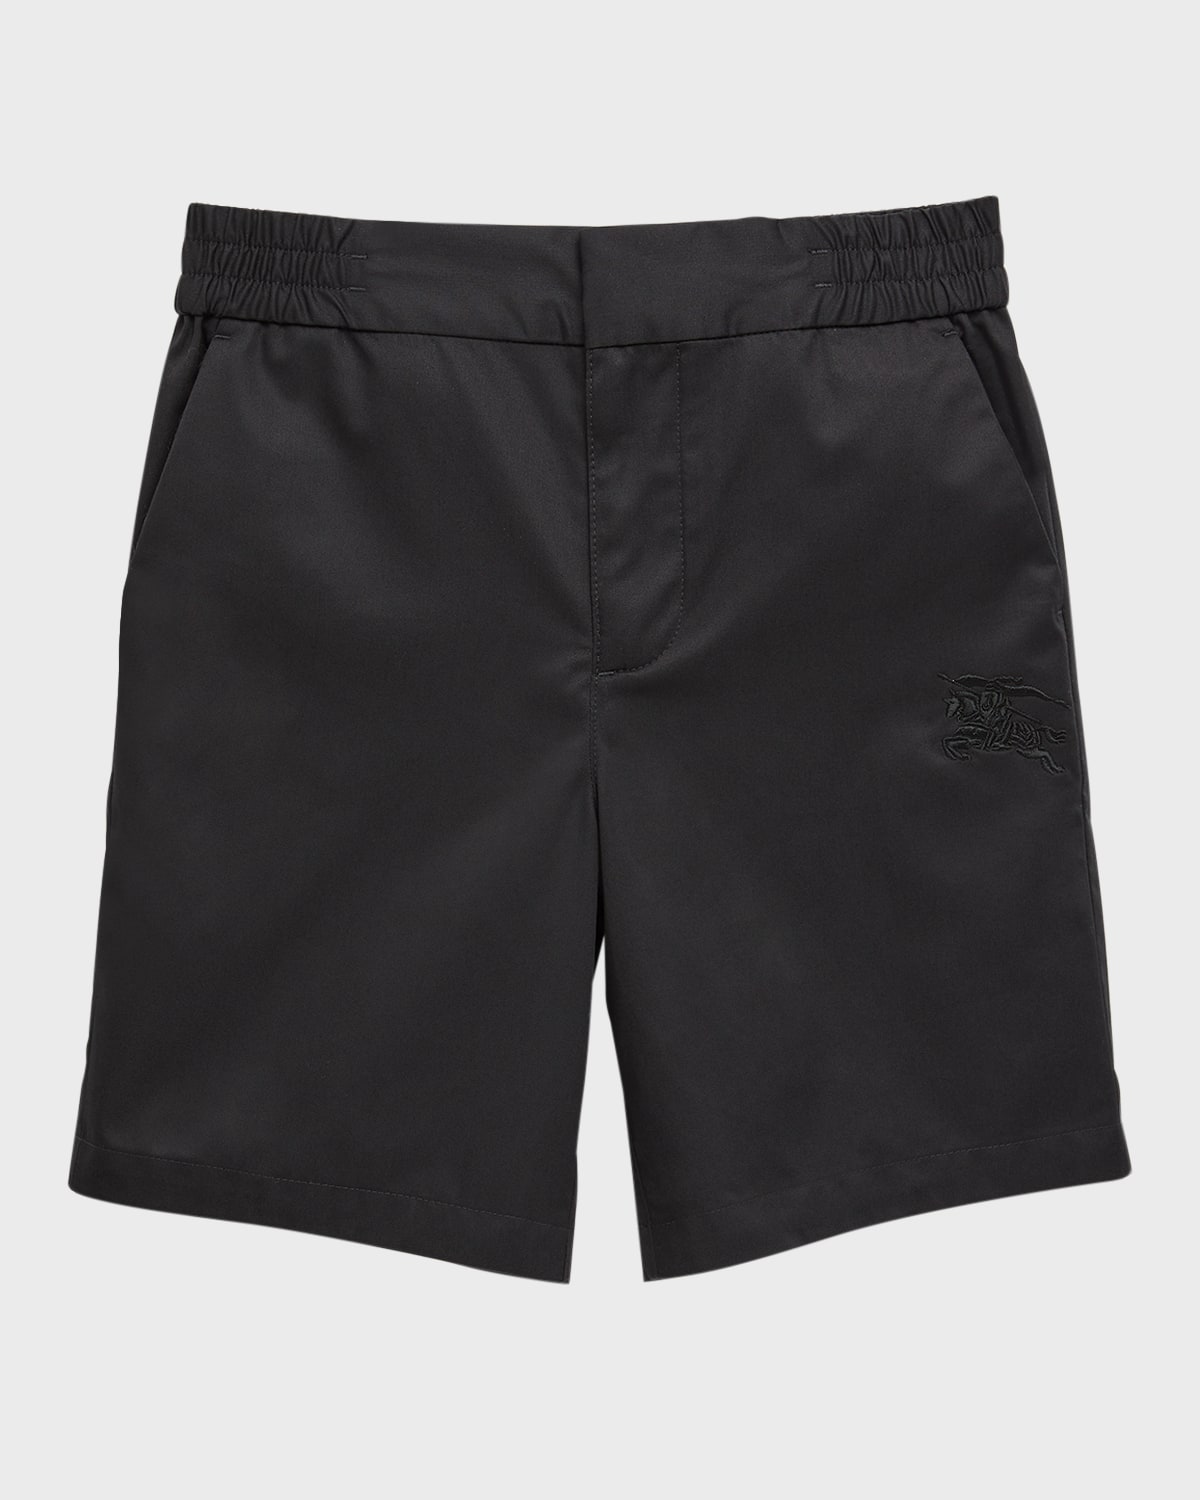 BURBERRY BOY'S ROMEO EQUESTRIAN EMBROIDERED SHORTS